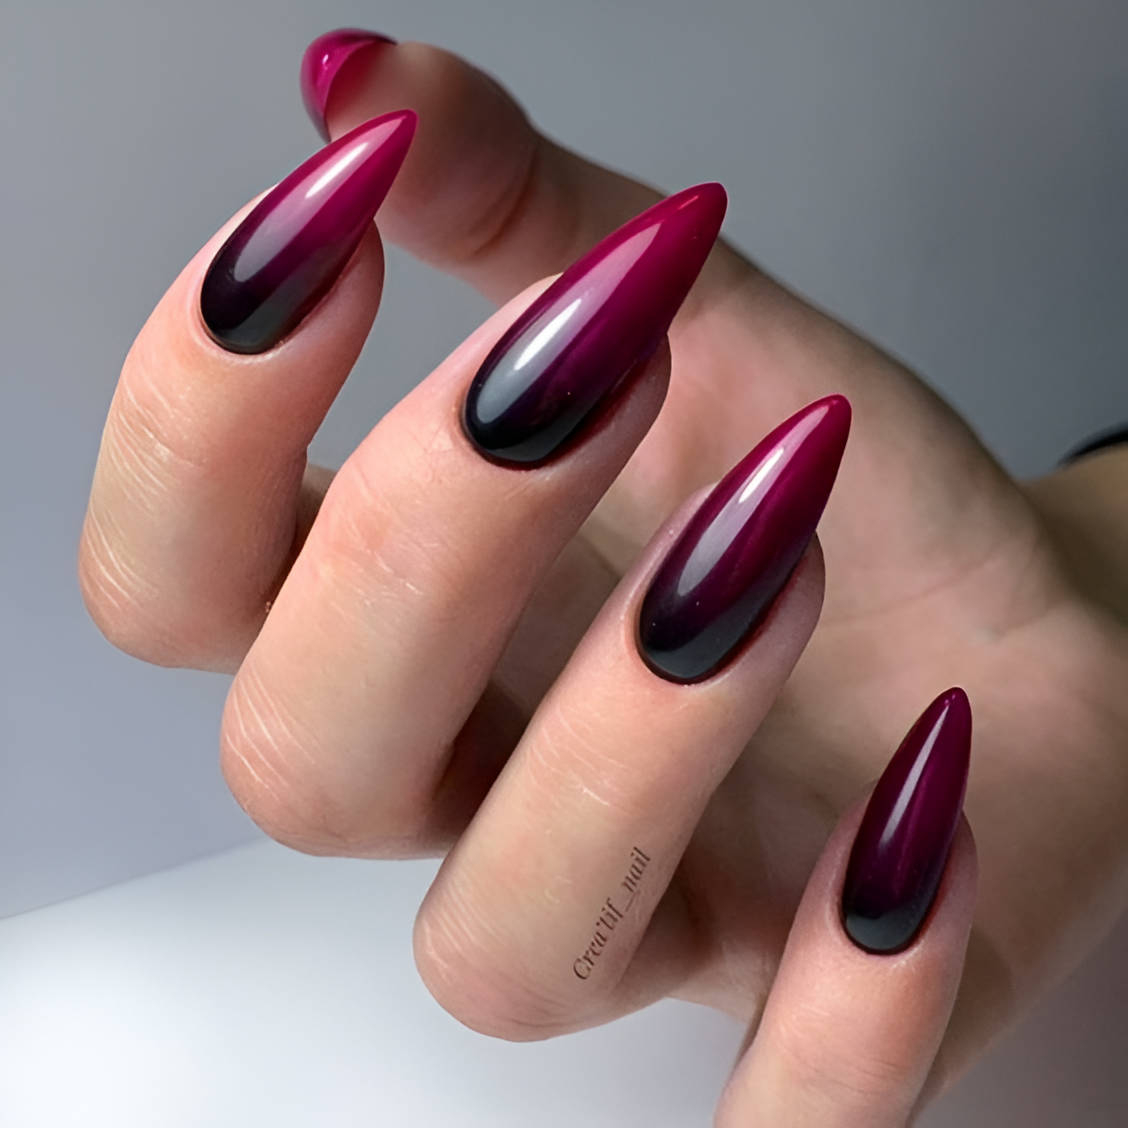 Ombre Burgundy Nail Design